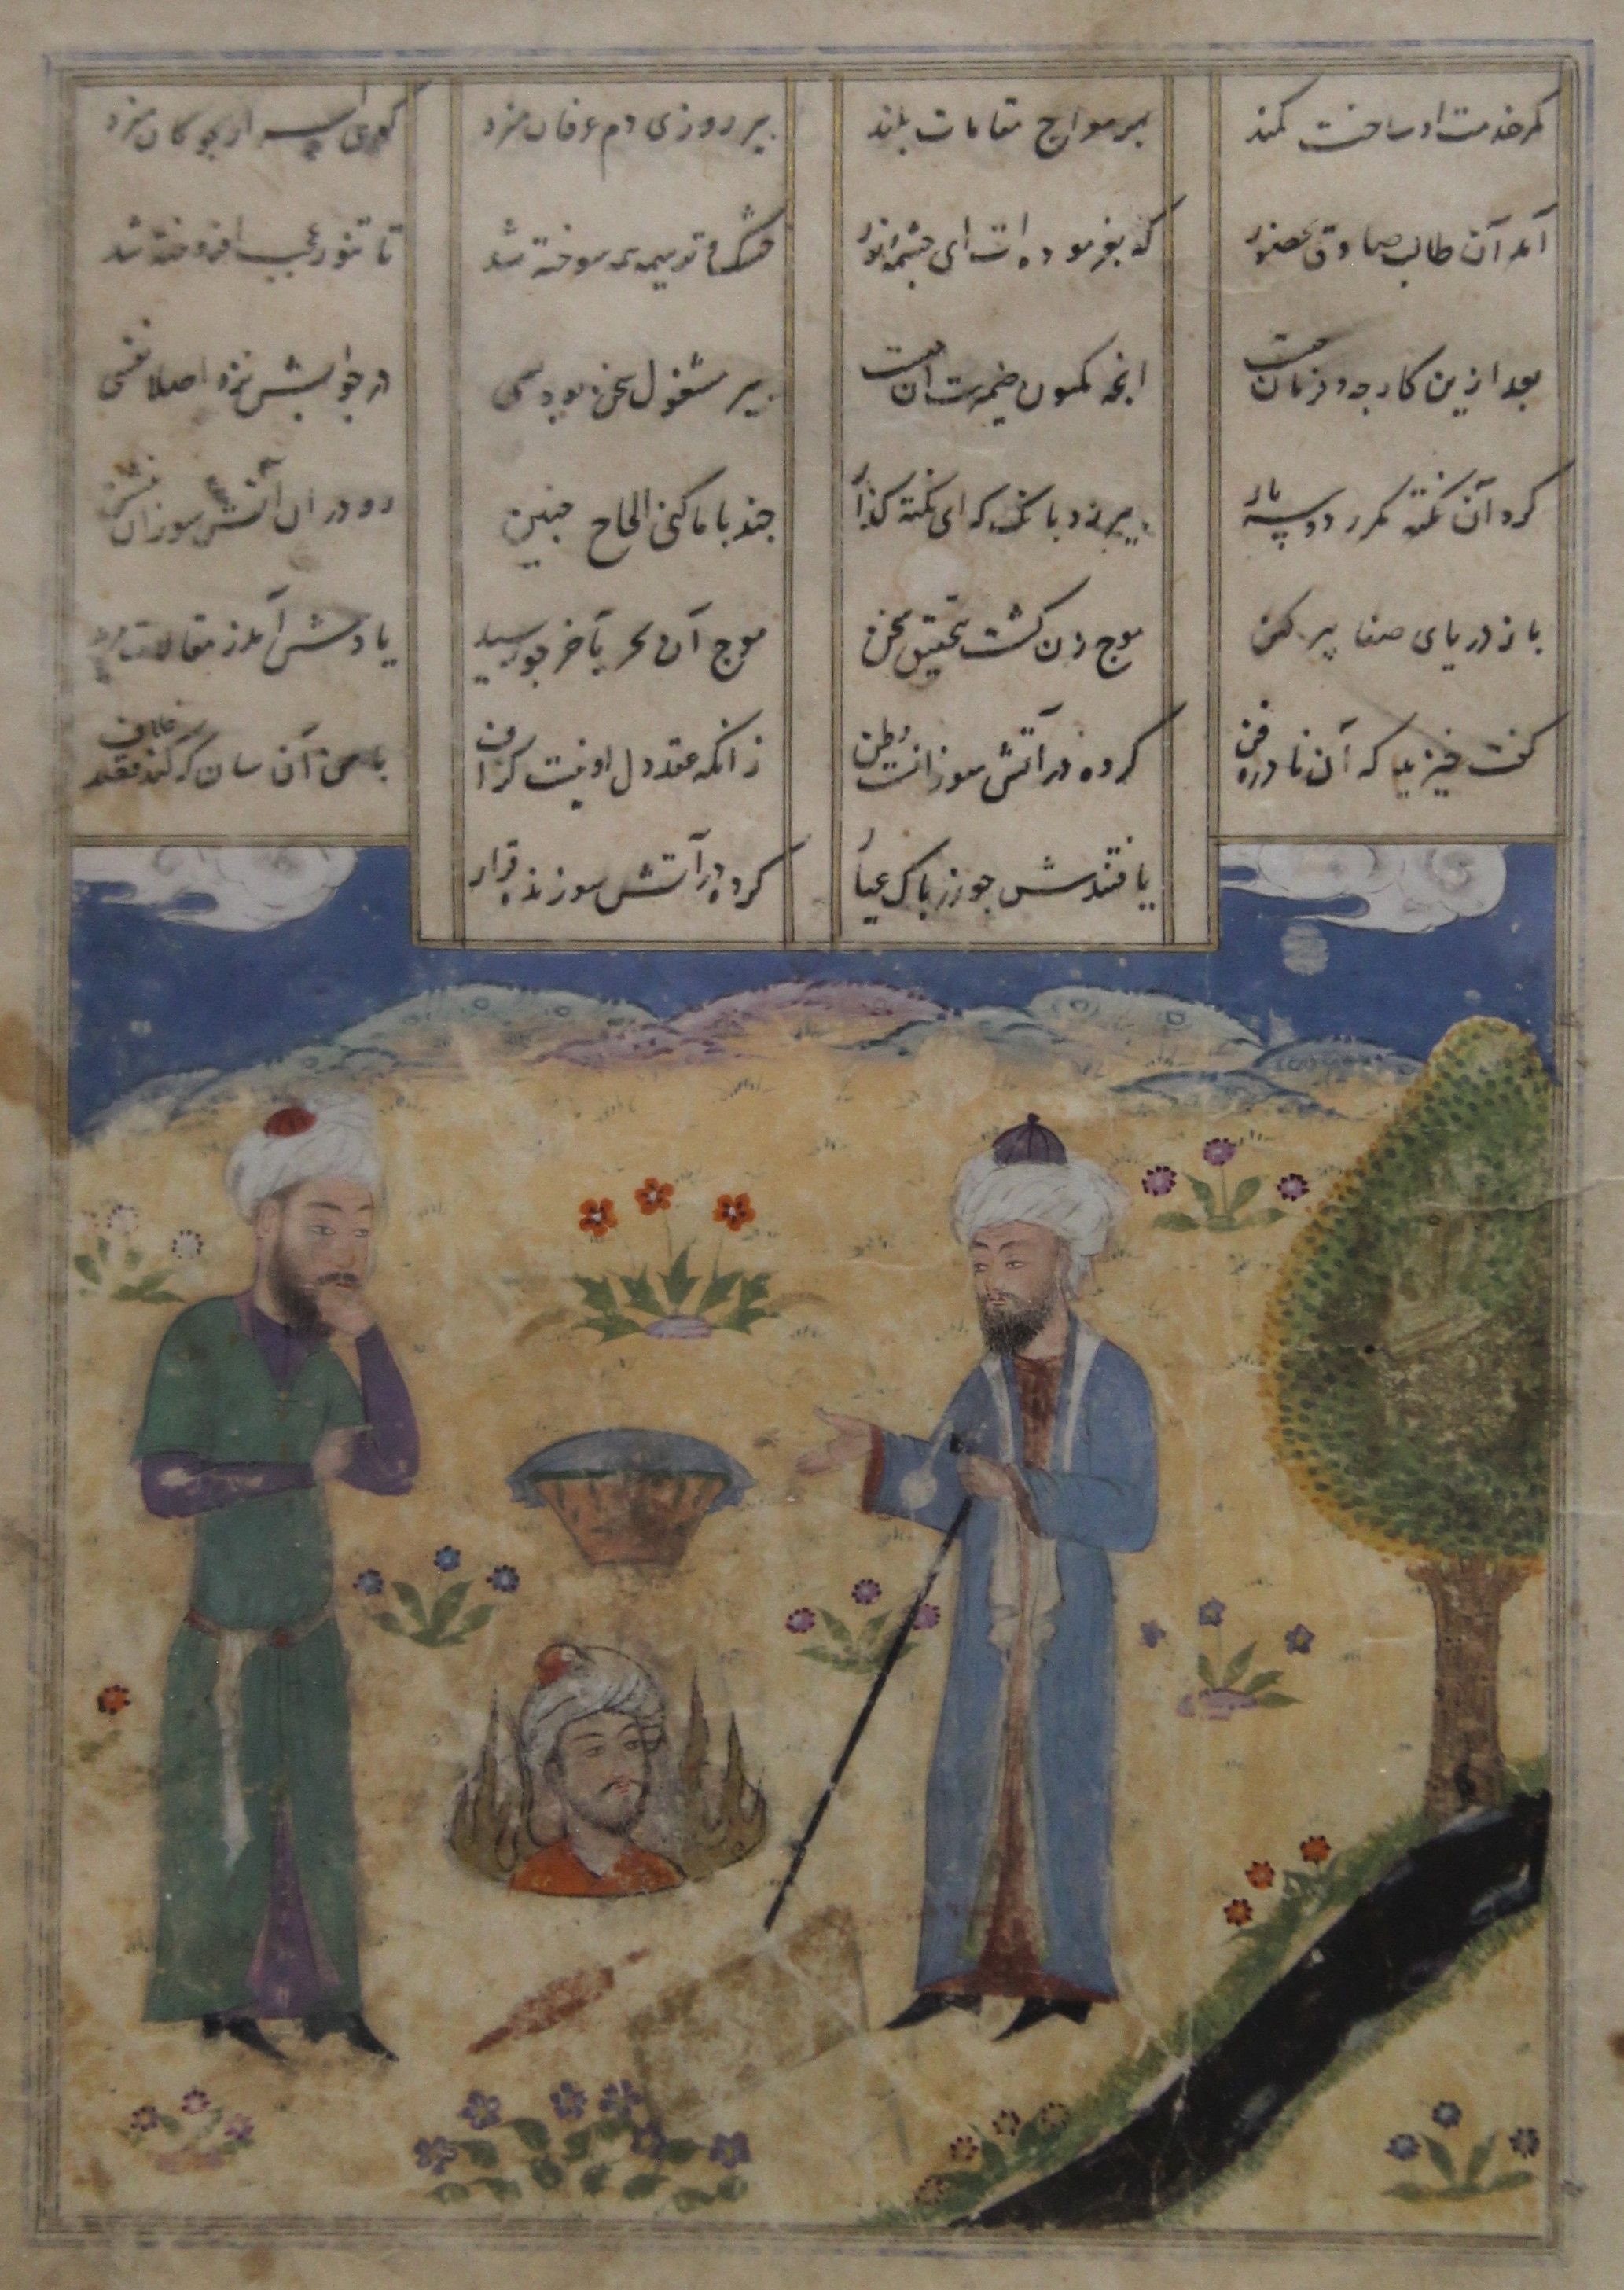 An early manuscript, possibly Persian or Arabic, painted with figures, framed and glazed. 12.5 x 17.